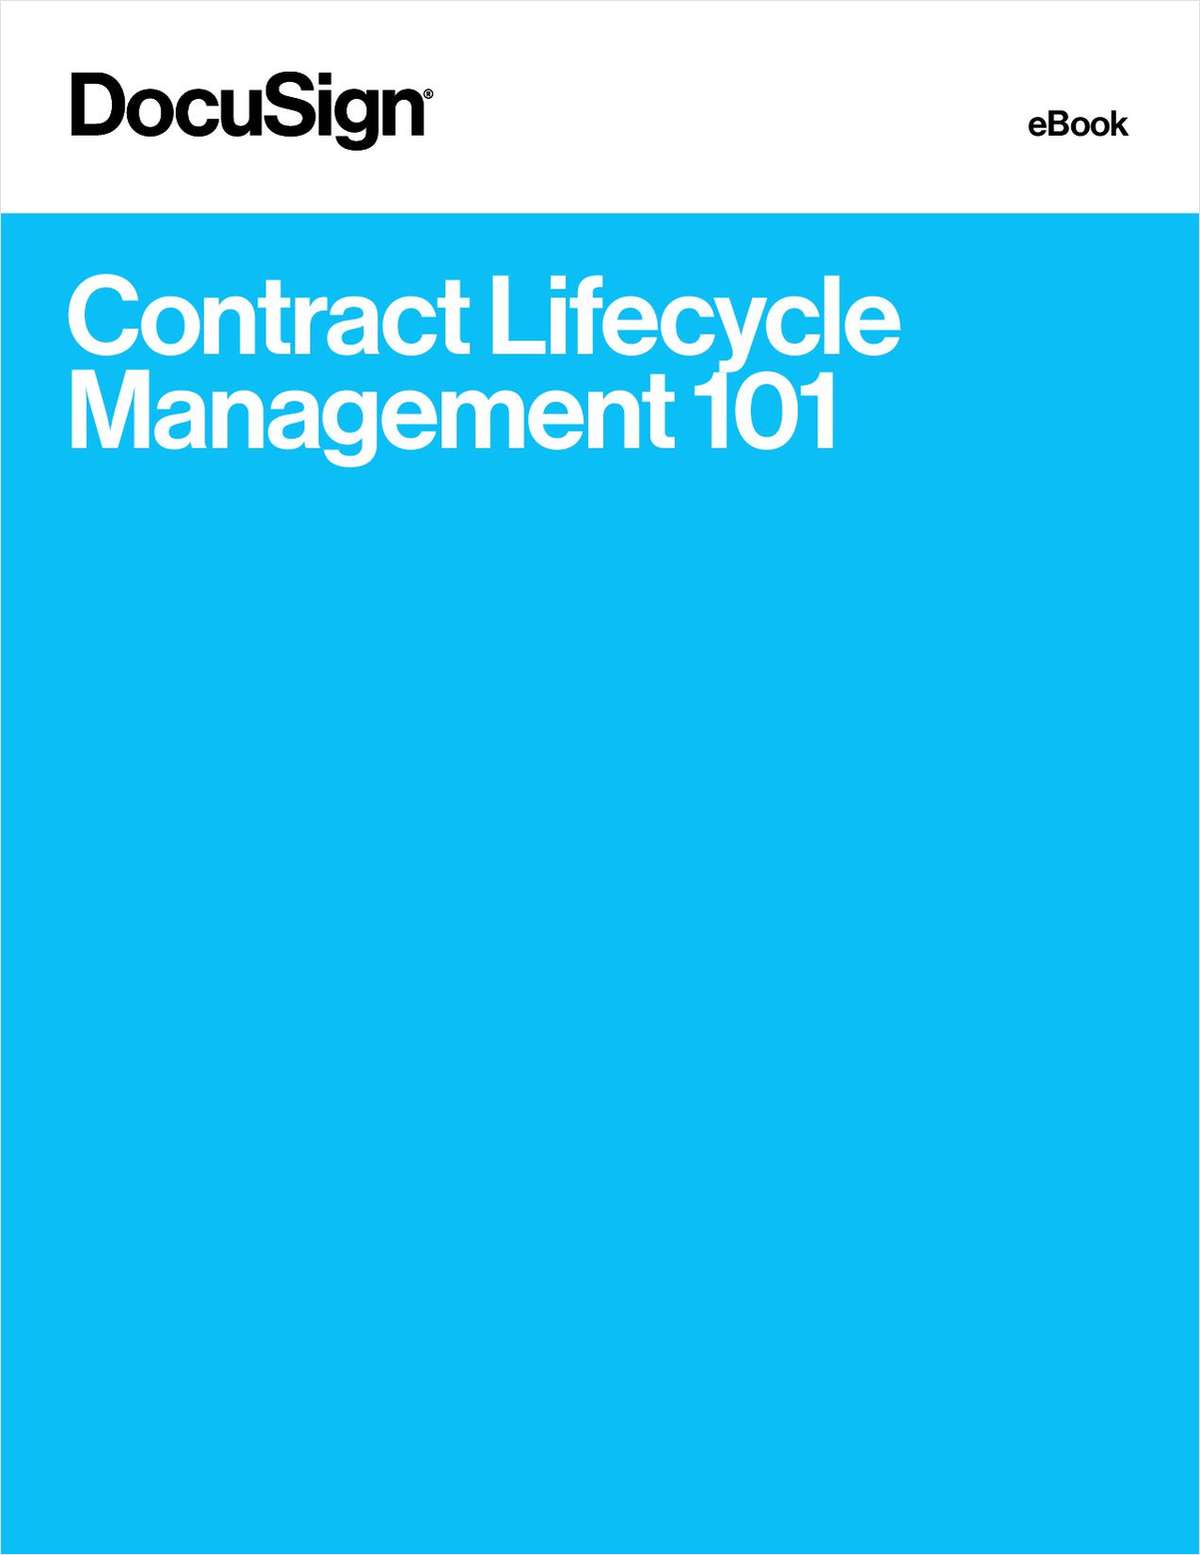 Contract Lifecycle Management 101